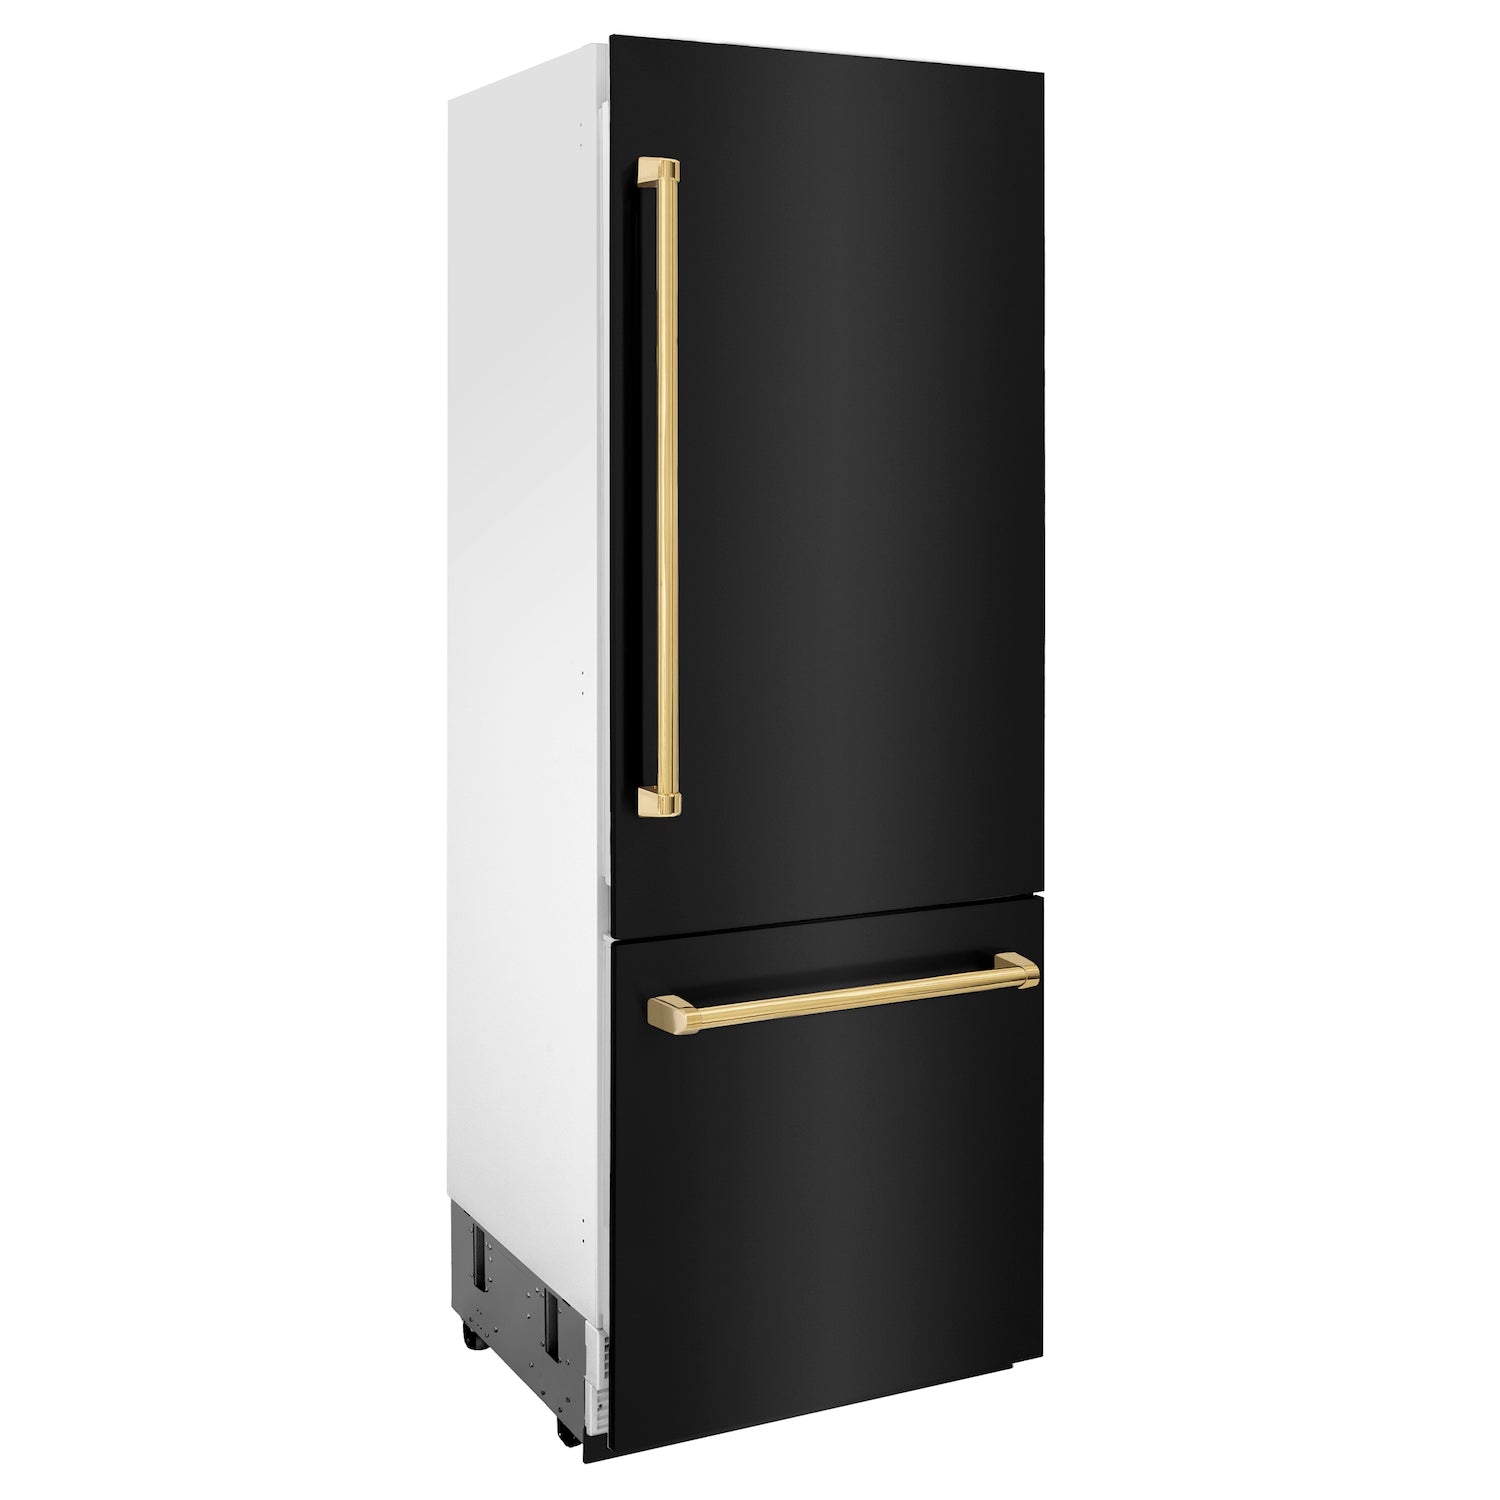 ZLINE 30" Autograph Edition Built-in Refrigerator in Black Stainless Steel with Polished Gold Accents side.